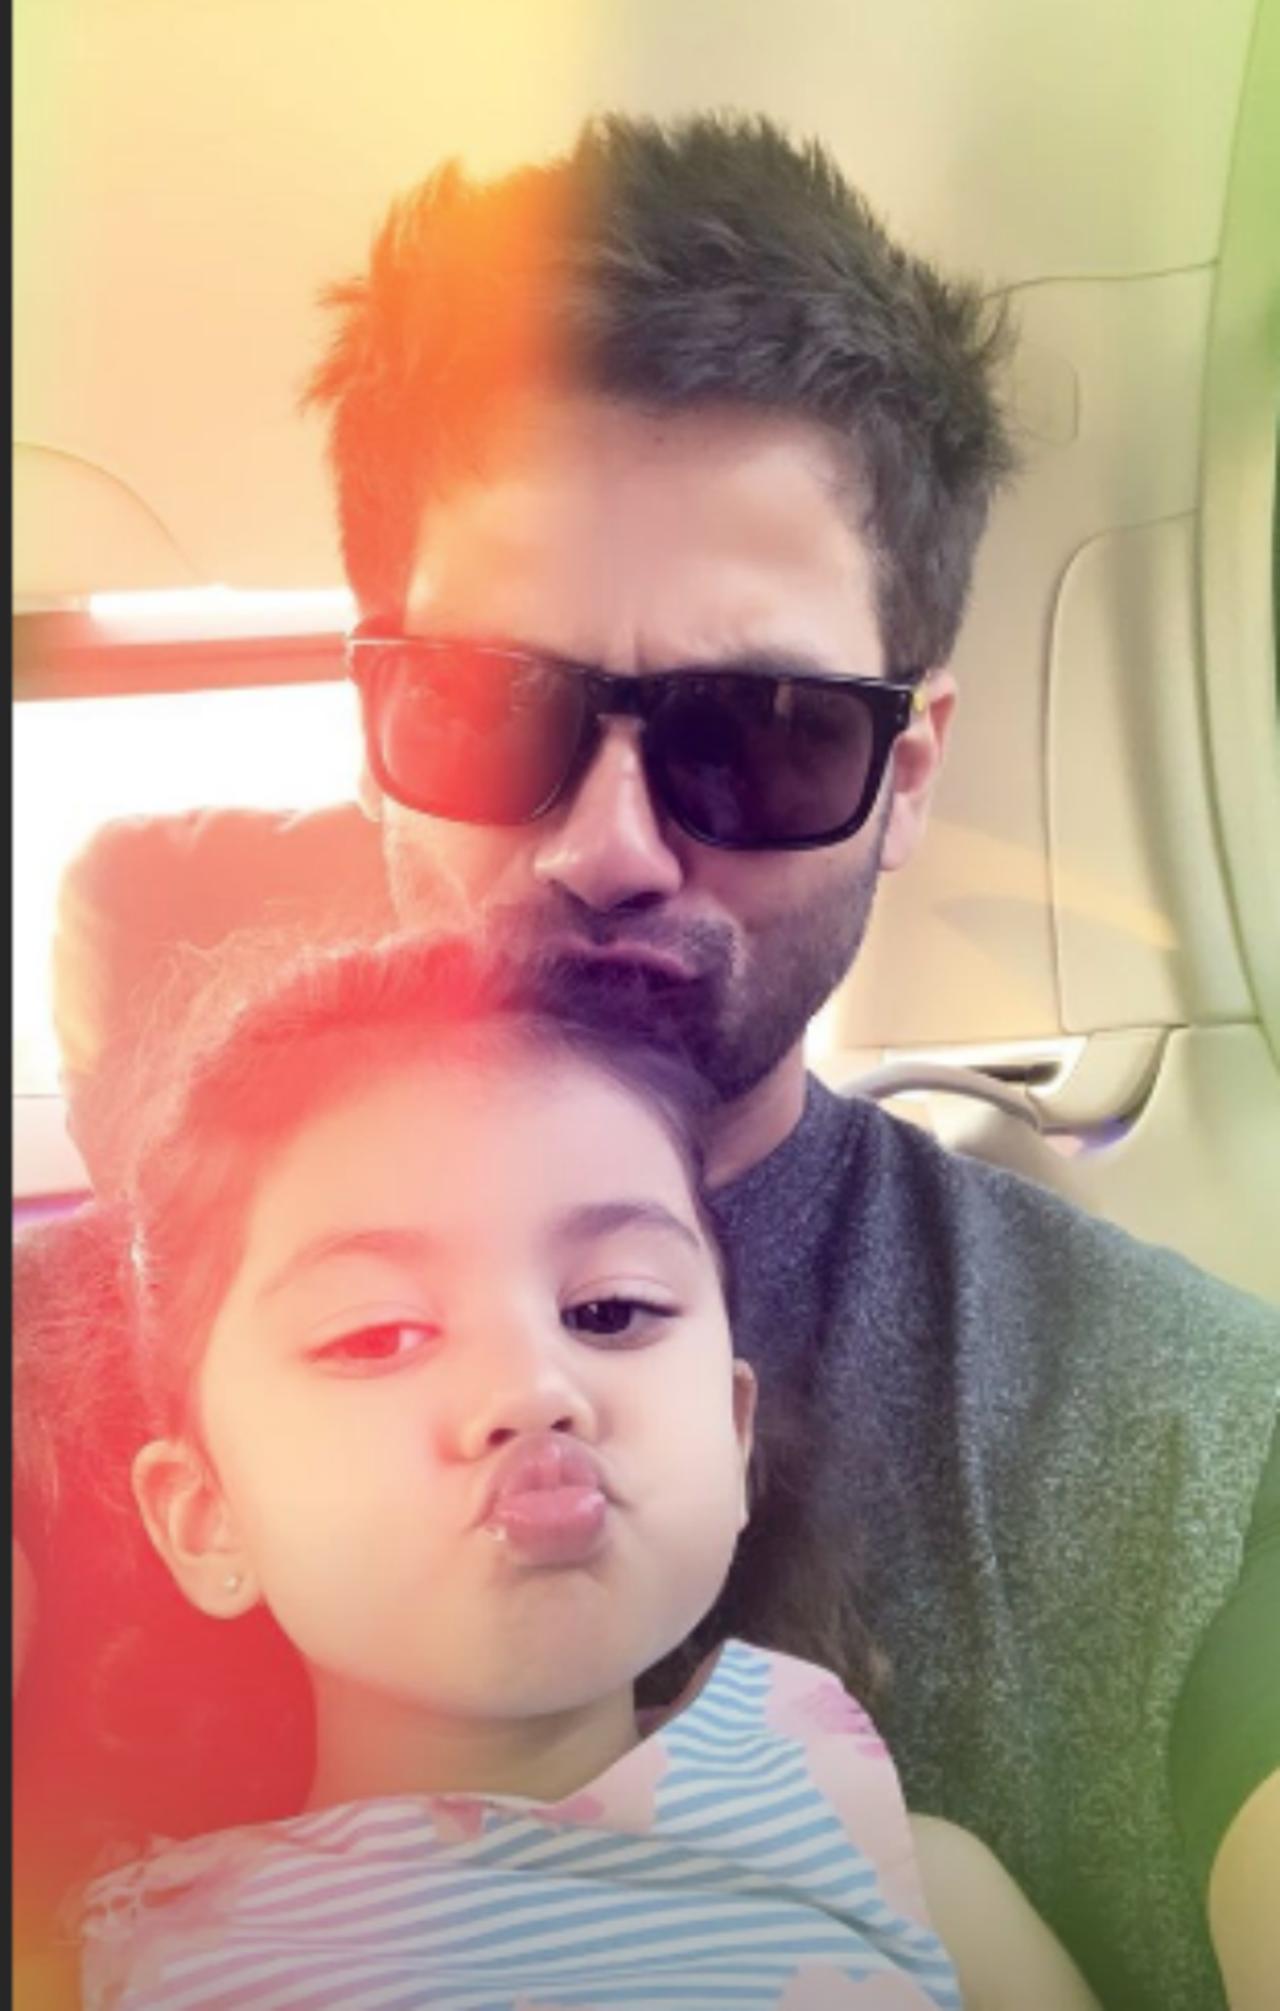 Misha Kapoor
Misha Kapoor was born to Shahid Kapoor and Mira Rajput on August 26, 2016. She is their first-born. Misha celebrated her 7th birthday recently. Her mother shared a picture and wrote, 